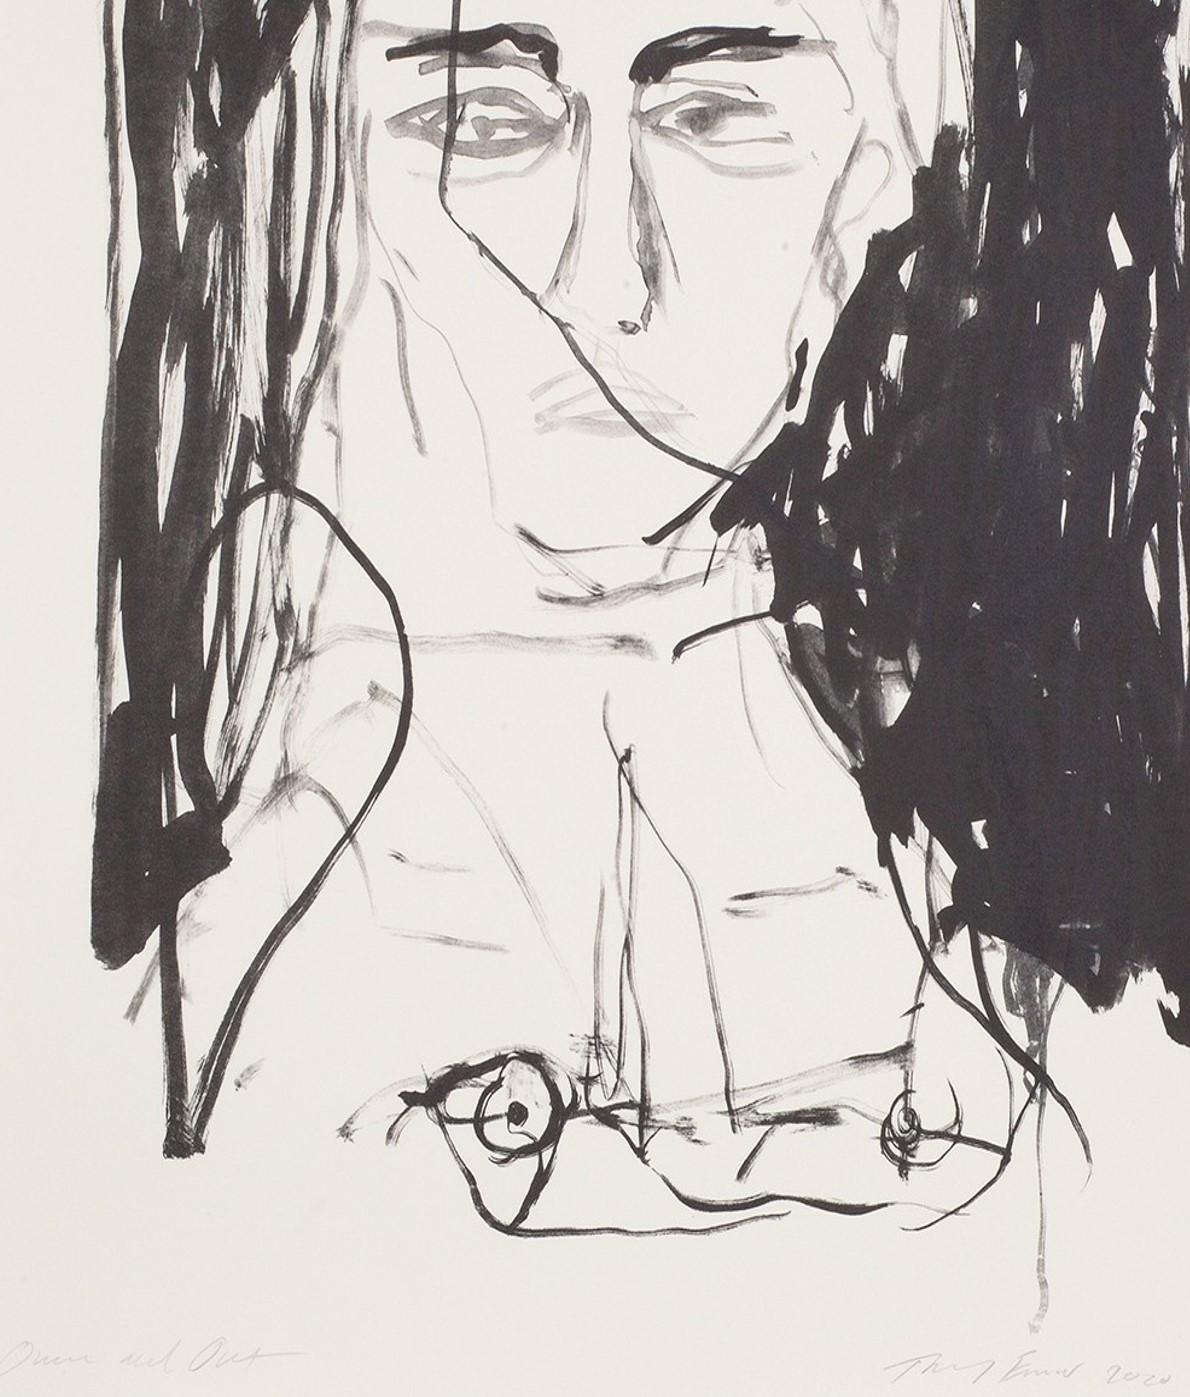 Over and Out - Emin, Contemporary, YBAs, Lithograph, Black, Portrait - Young British Artists (YBA) Print by Tracey Emin